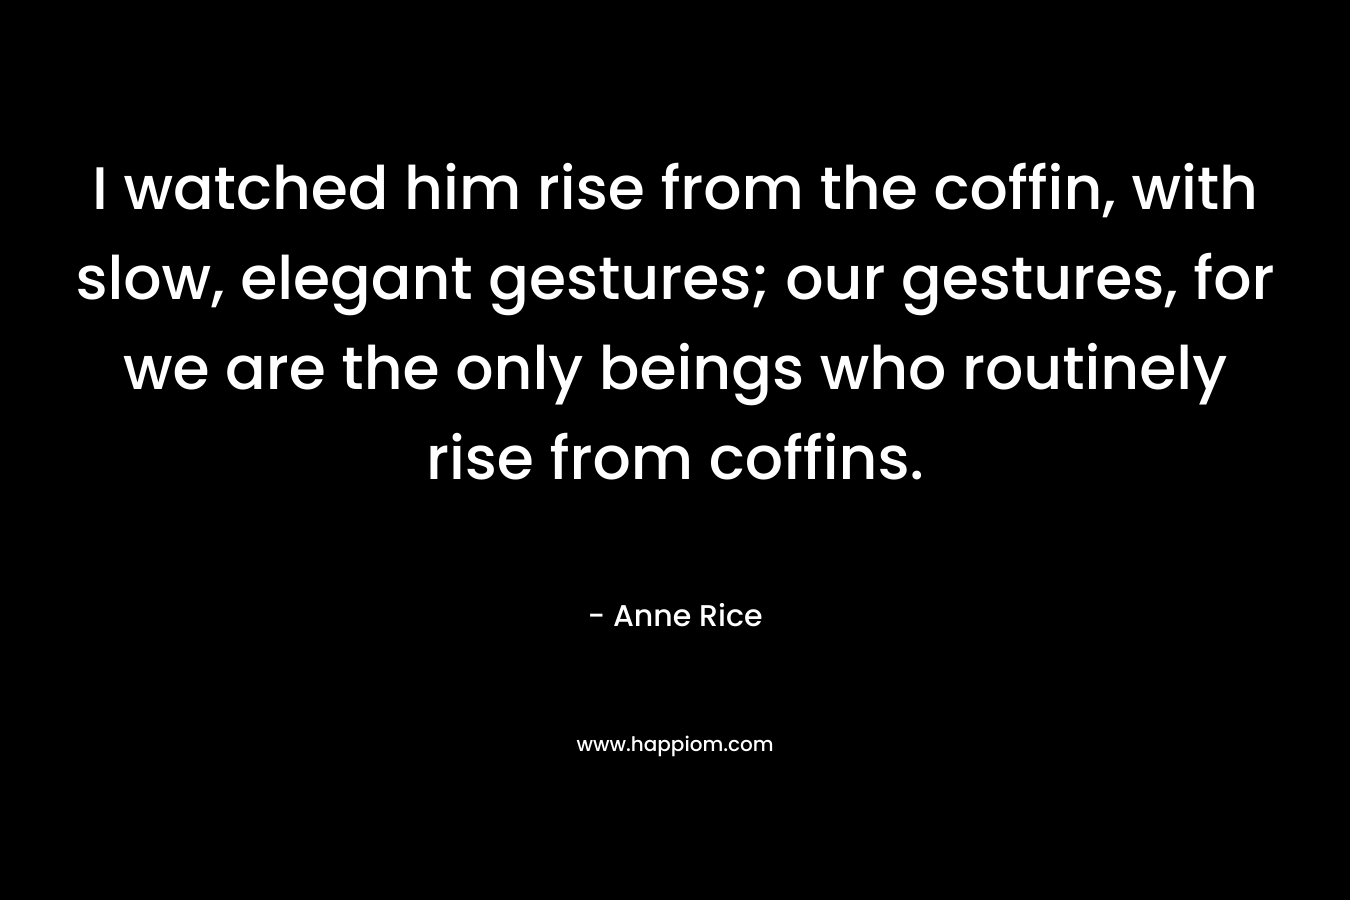 I watched him rise from the coffin, with slow, elegant gestures; our gestures, for we are the only beings who routinely rise from coffins. – Anne Rice